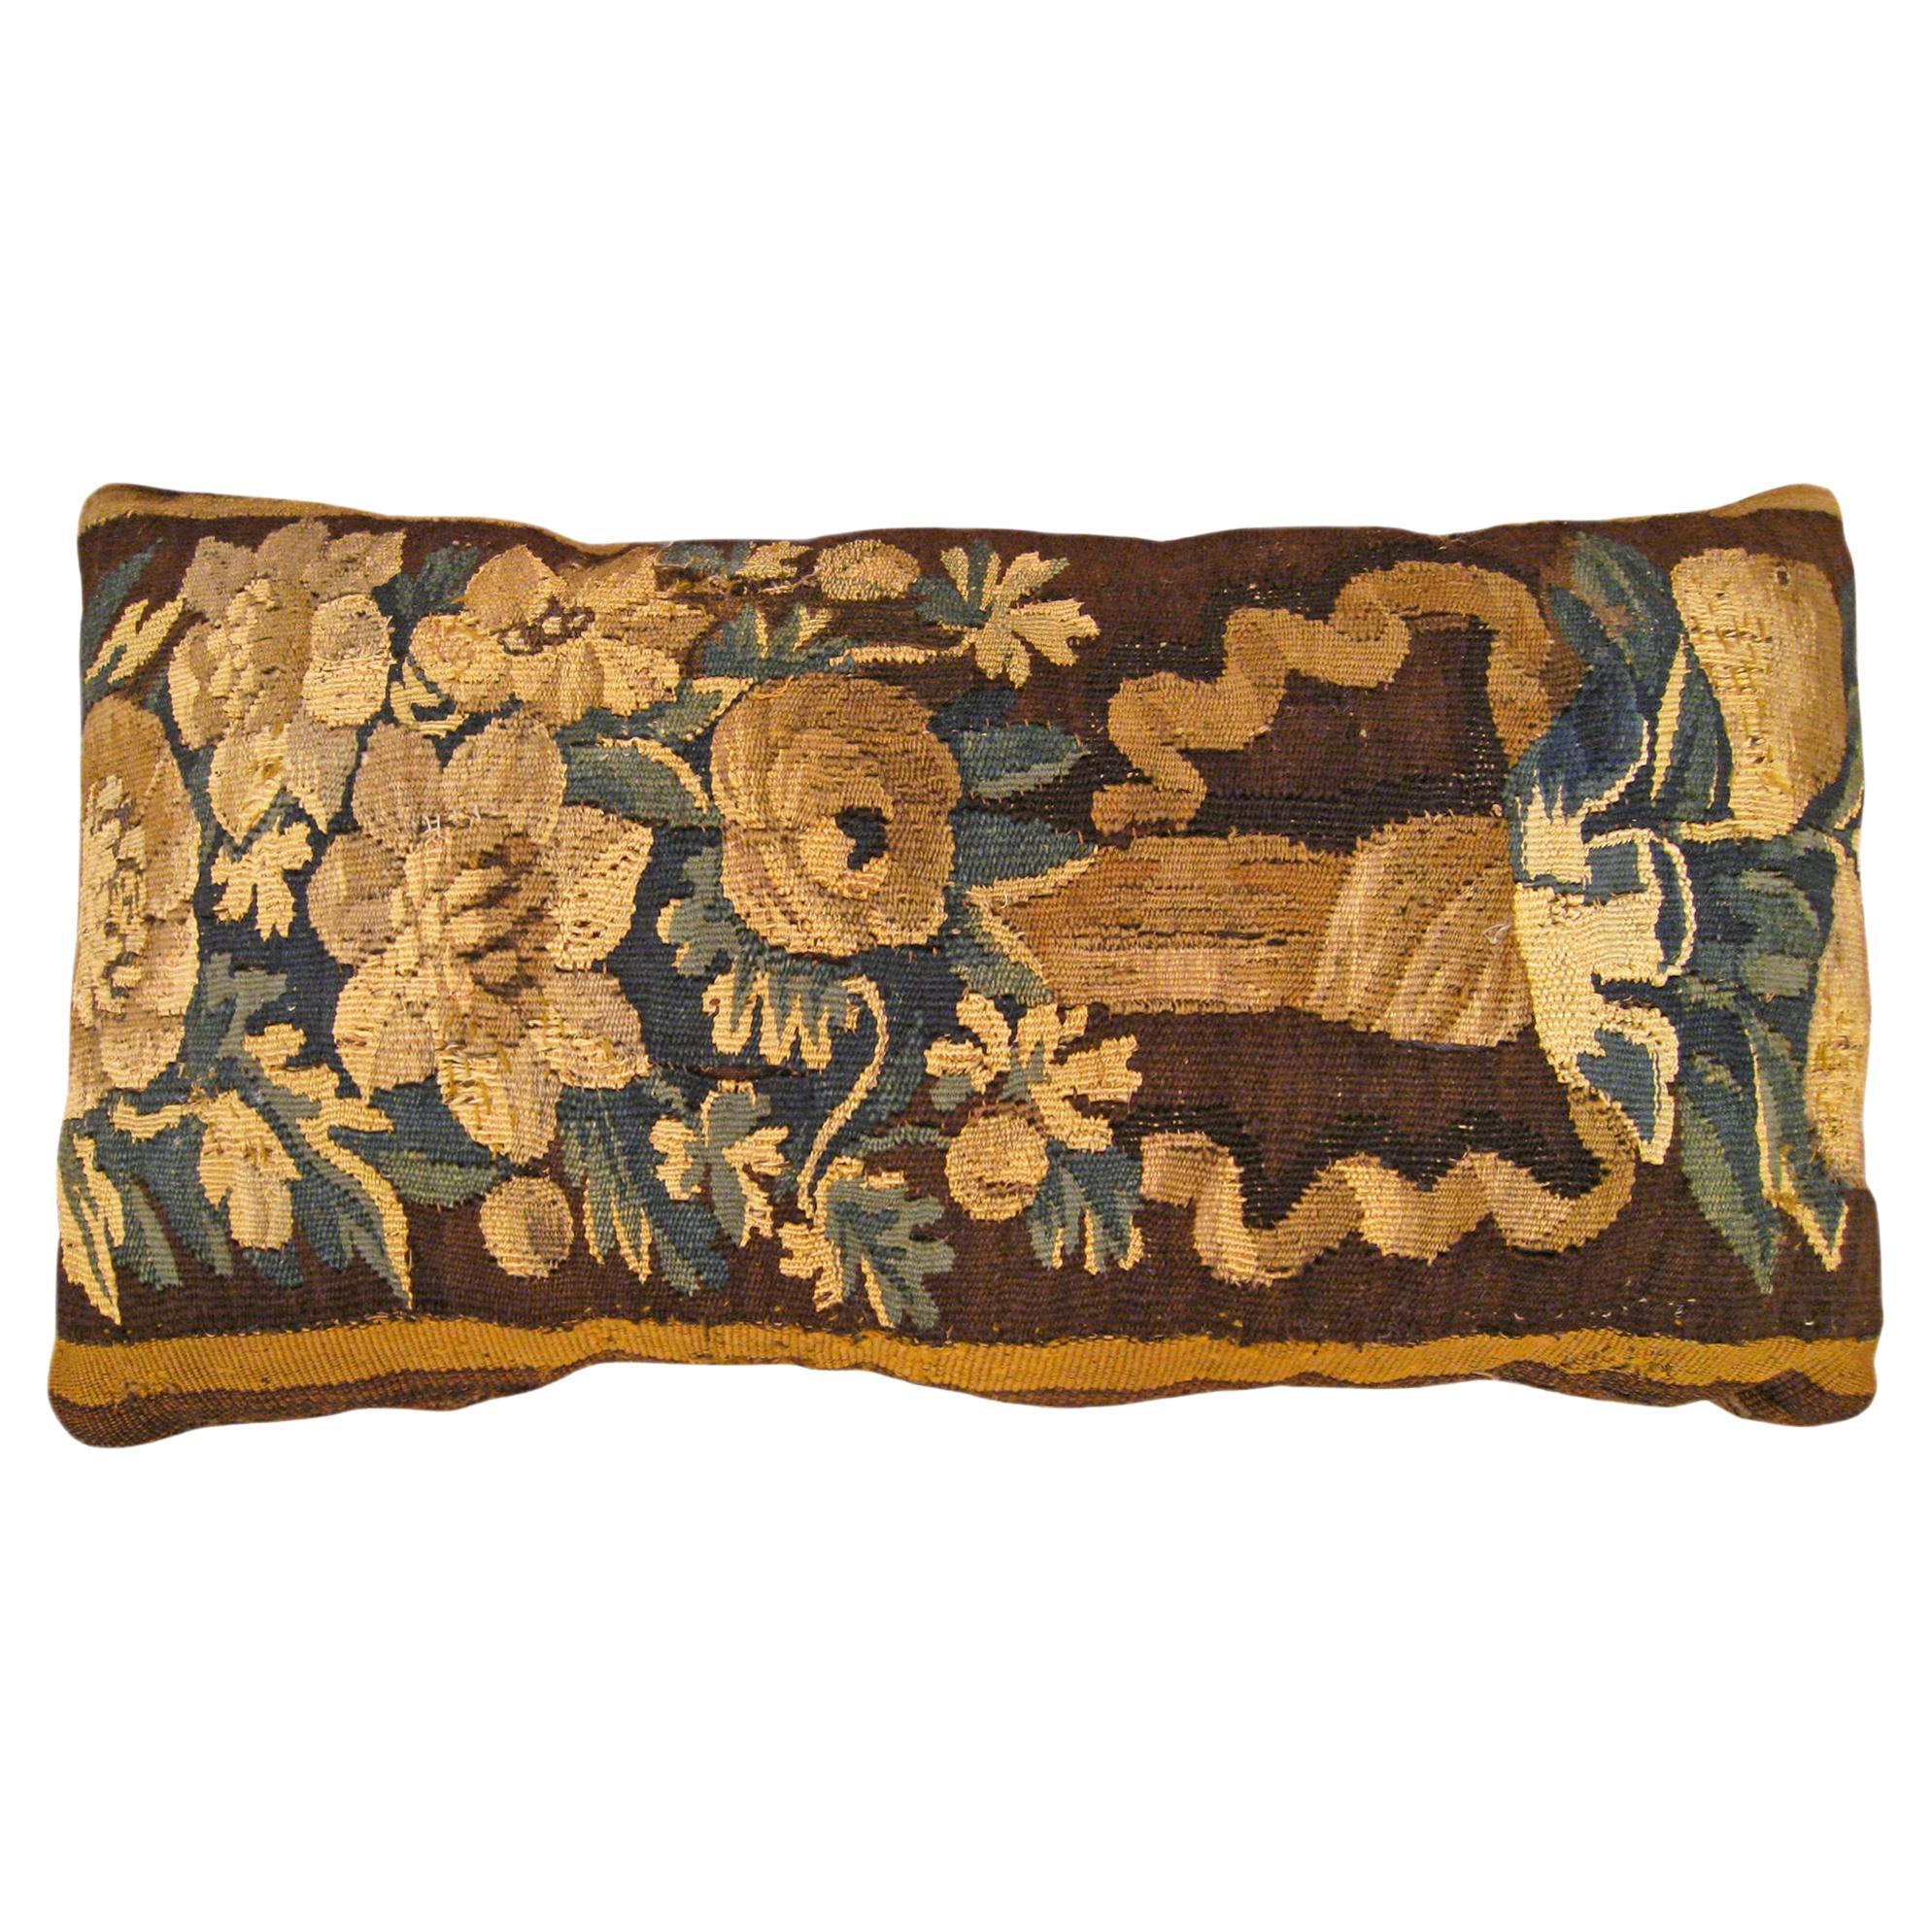 Decorative Antique 18th Century Tapestry Pillow with Floral Elements Allover For Sale